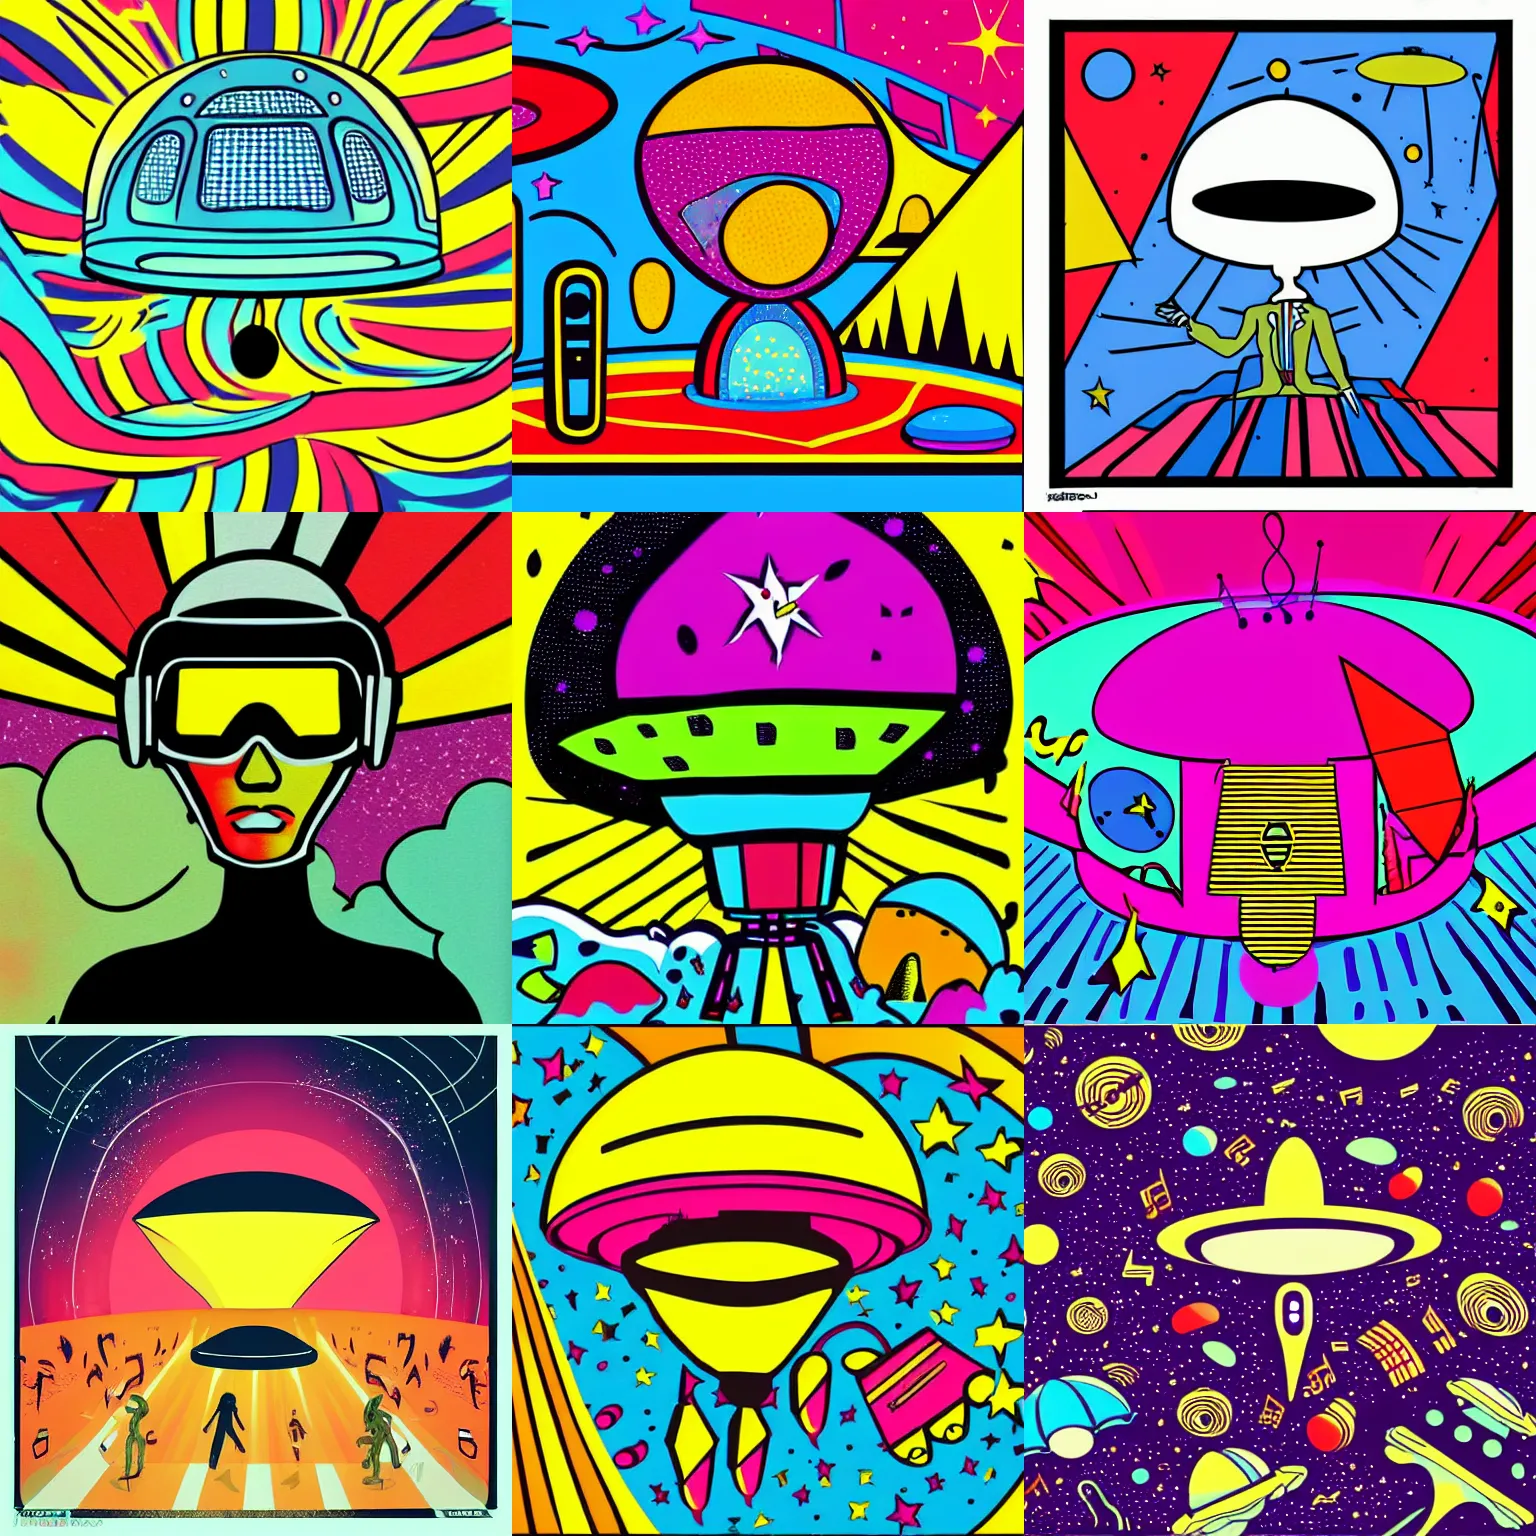 Prompt: ufo wandering in a space full of music, pop art, illustration, colorful